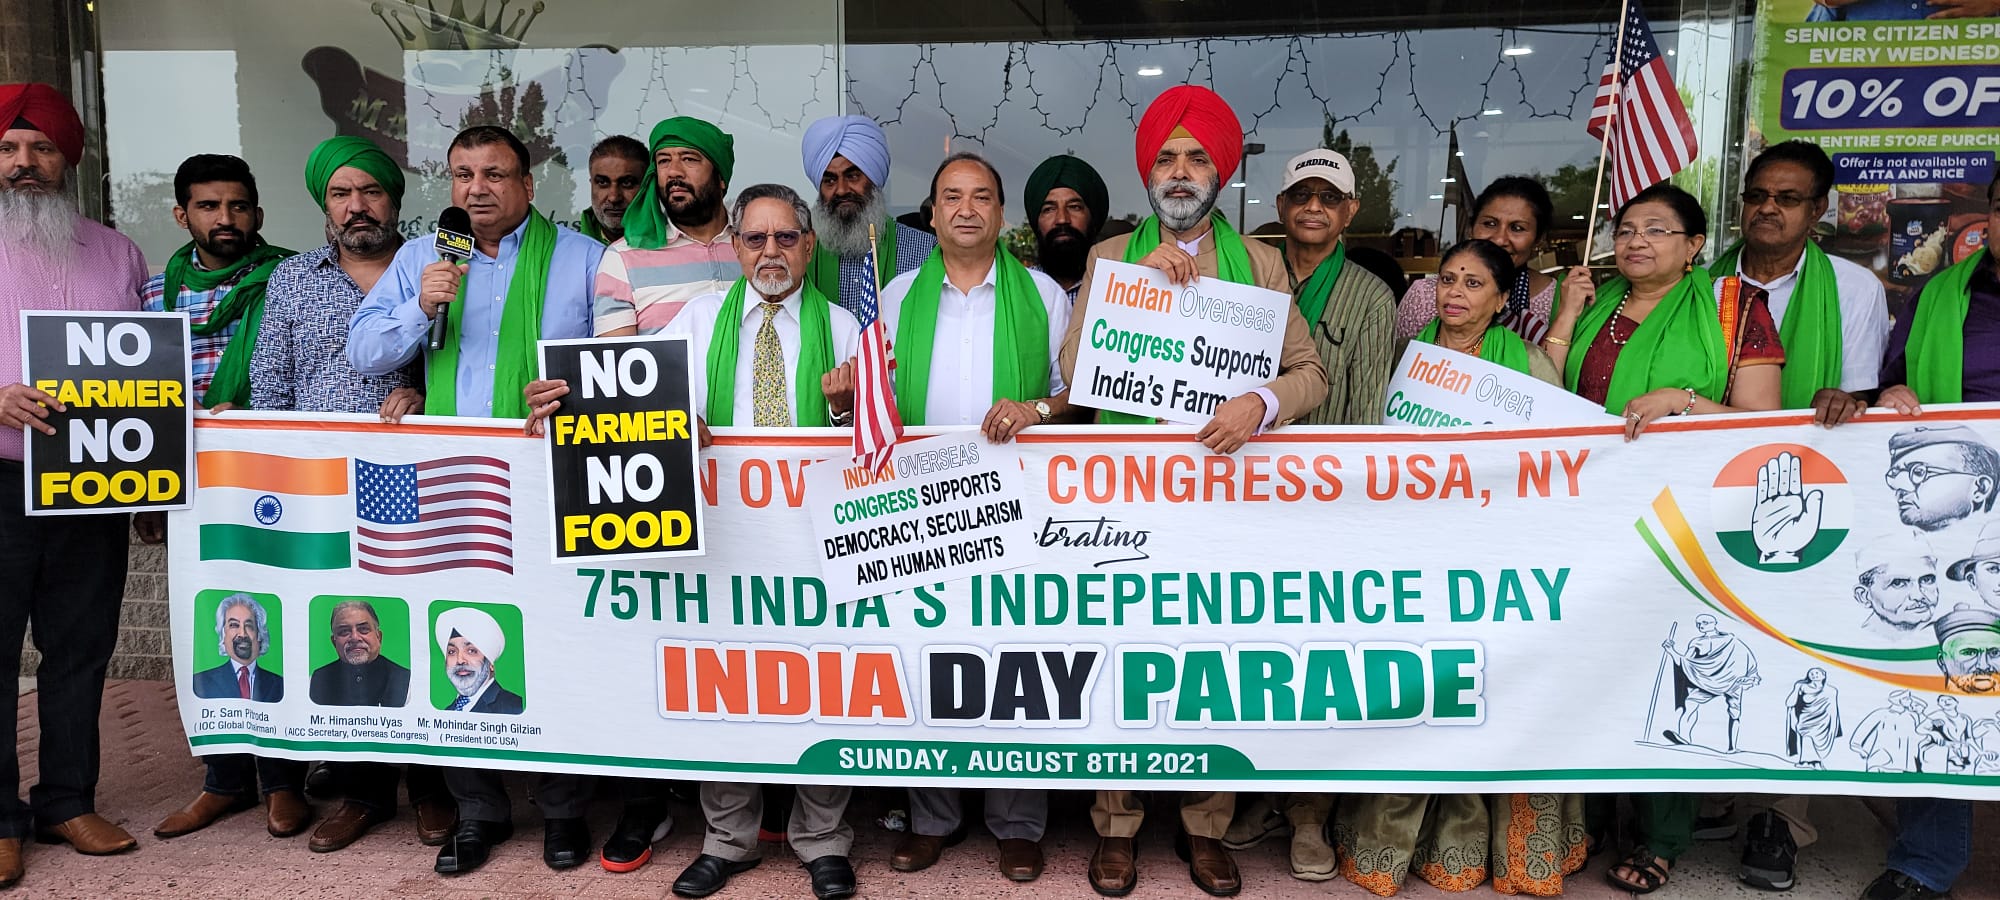 Supporters of farmers’ issue protest at IDP New York